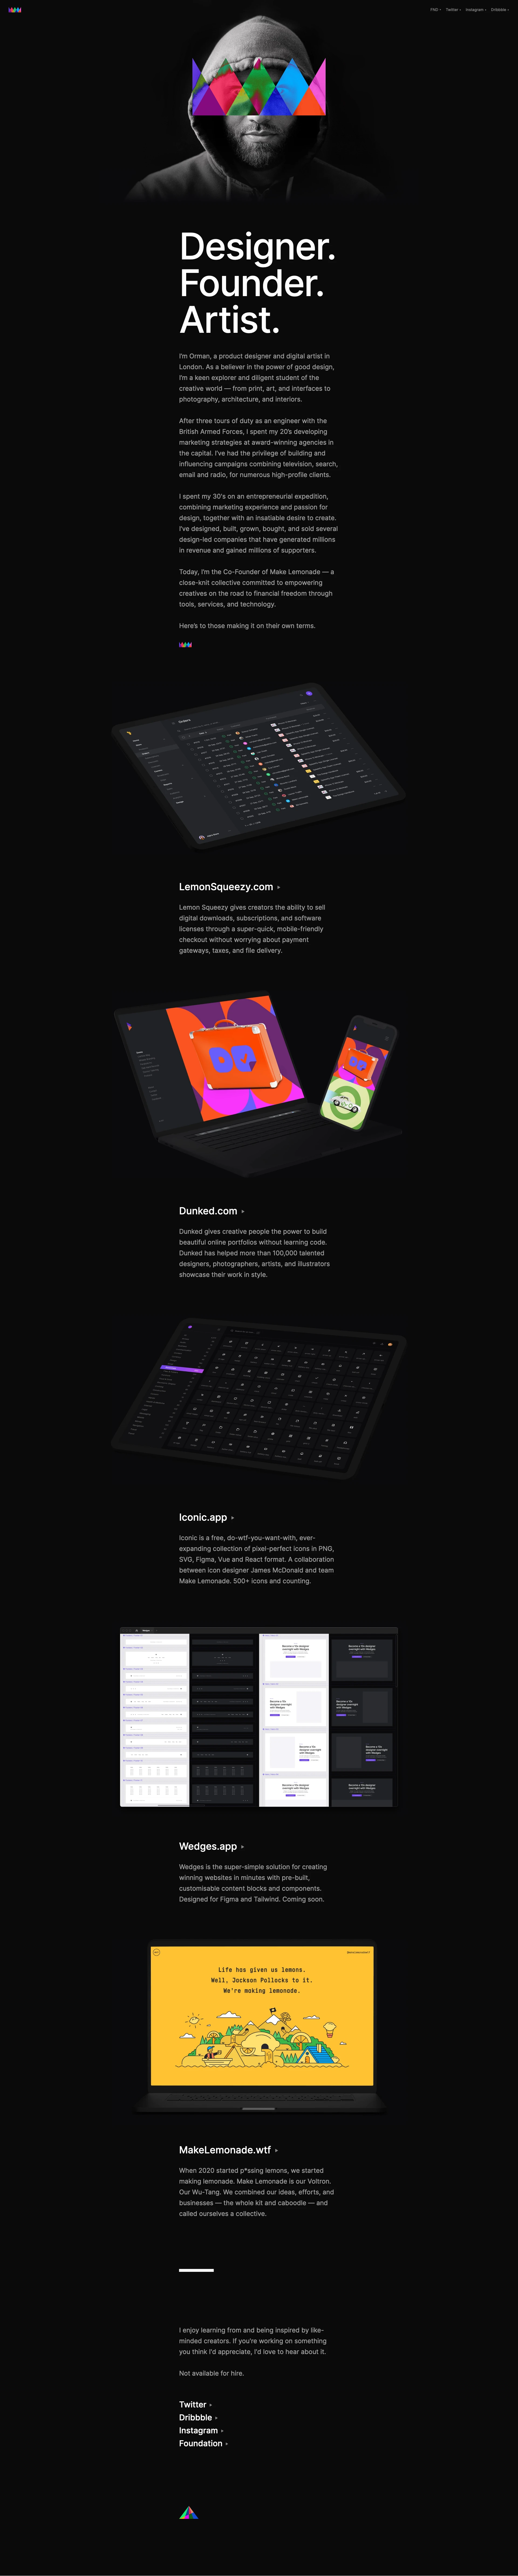 Orman Clark Landing Page Example: Orman Clark is a product designer, digital artist, and Co-Founder of Make Lemonade — a collective committed to empowering fellow creatives on the road to financial freedom.